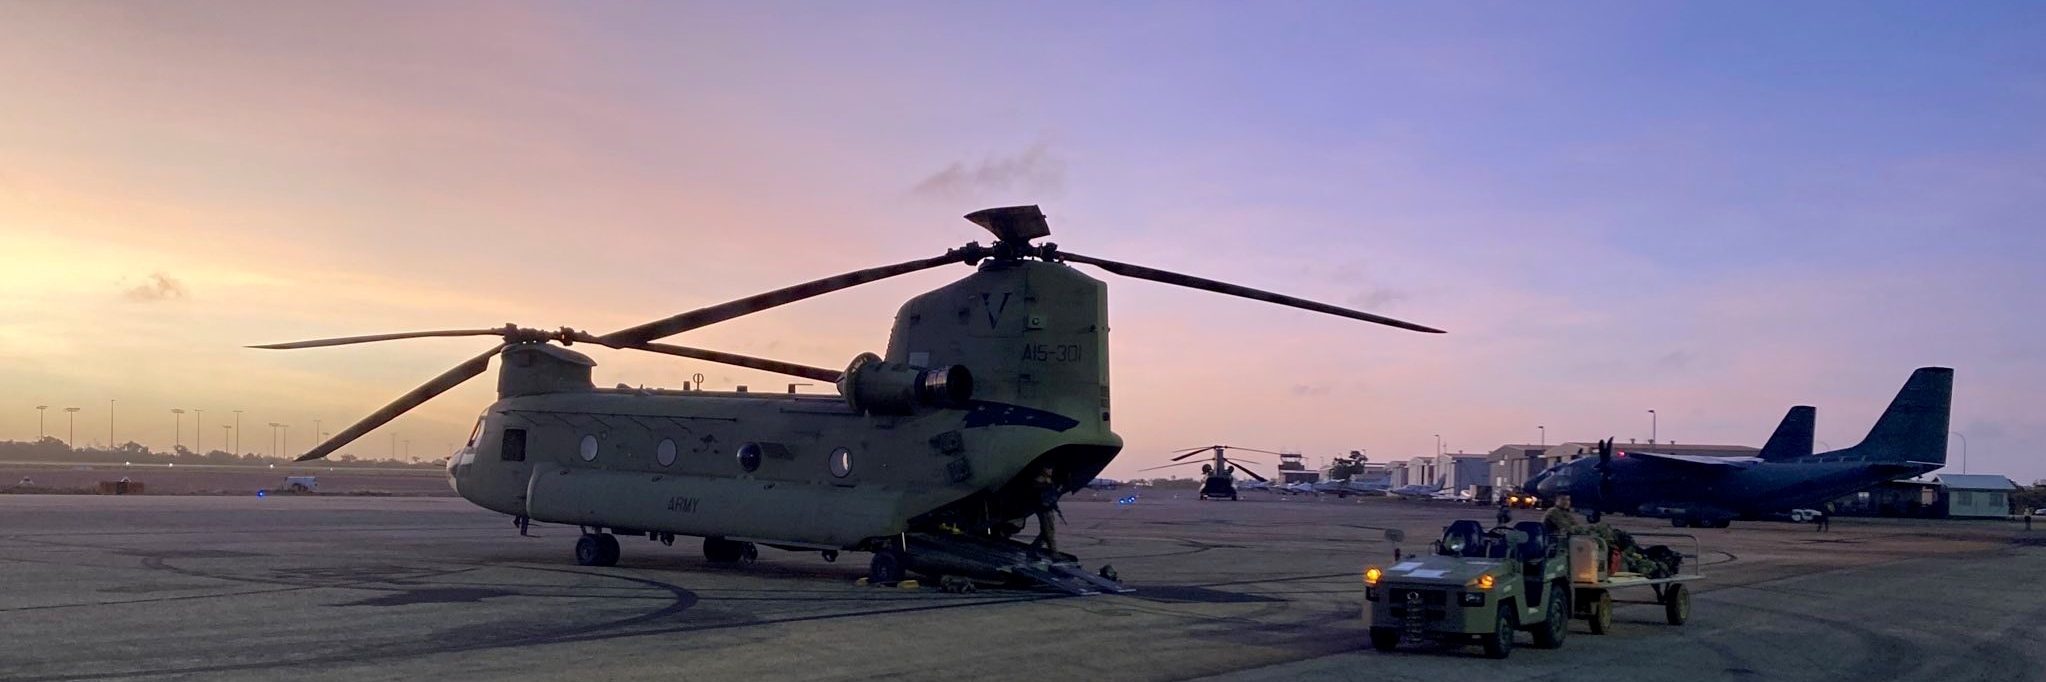 CH-47F Chinook helicopter being used in Operation Flood Assist